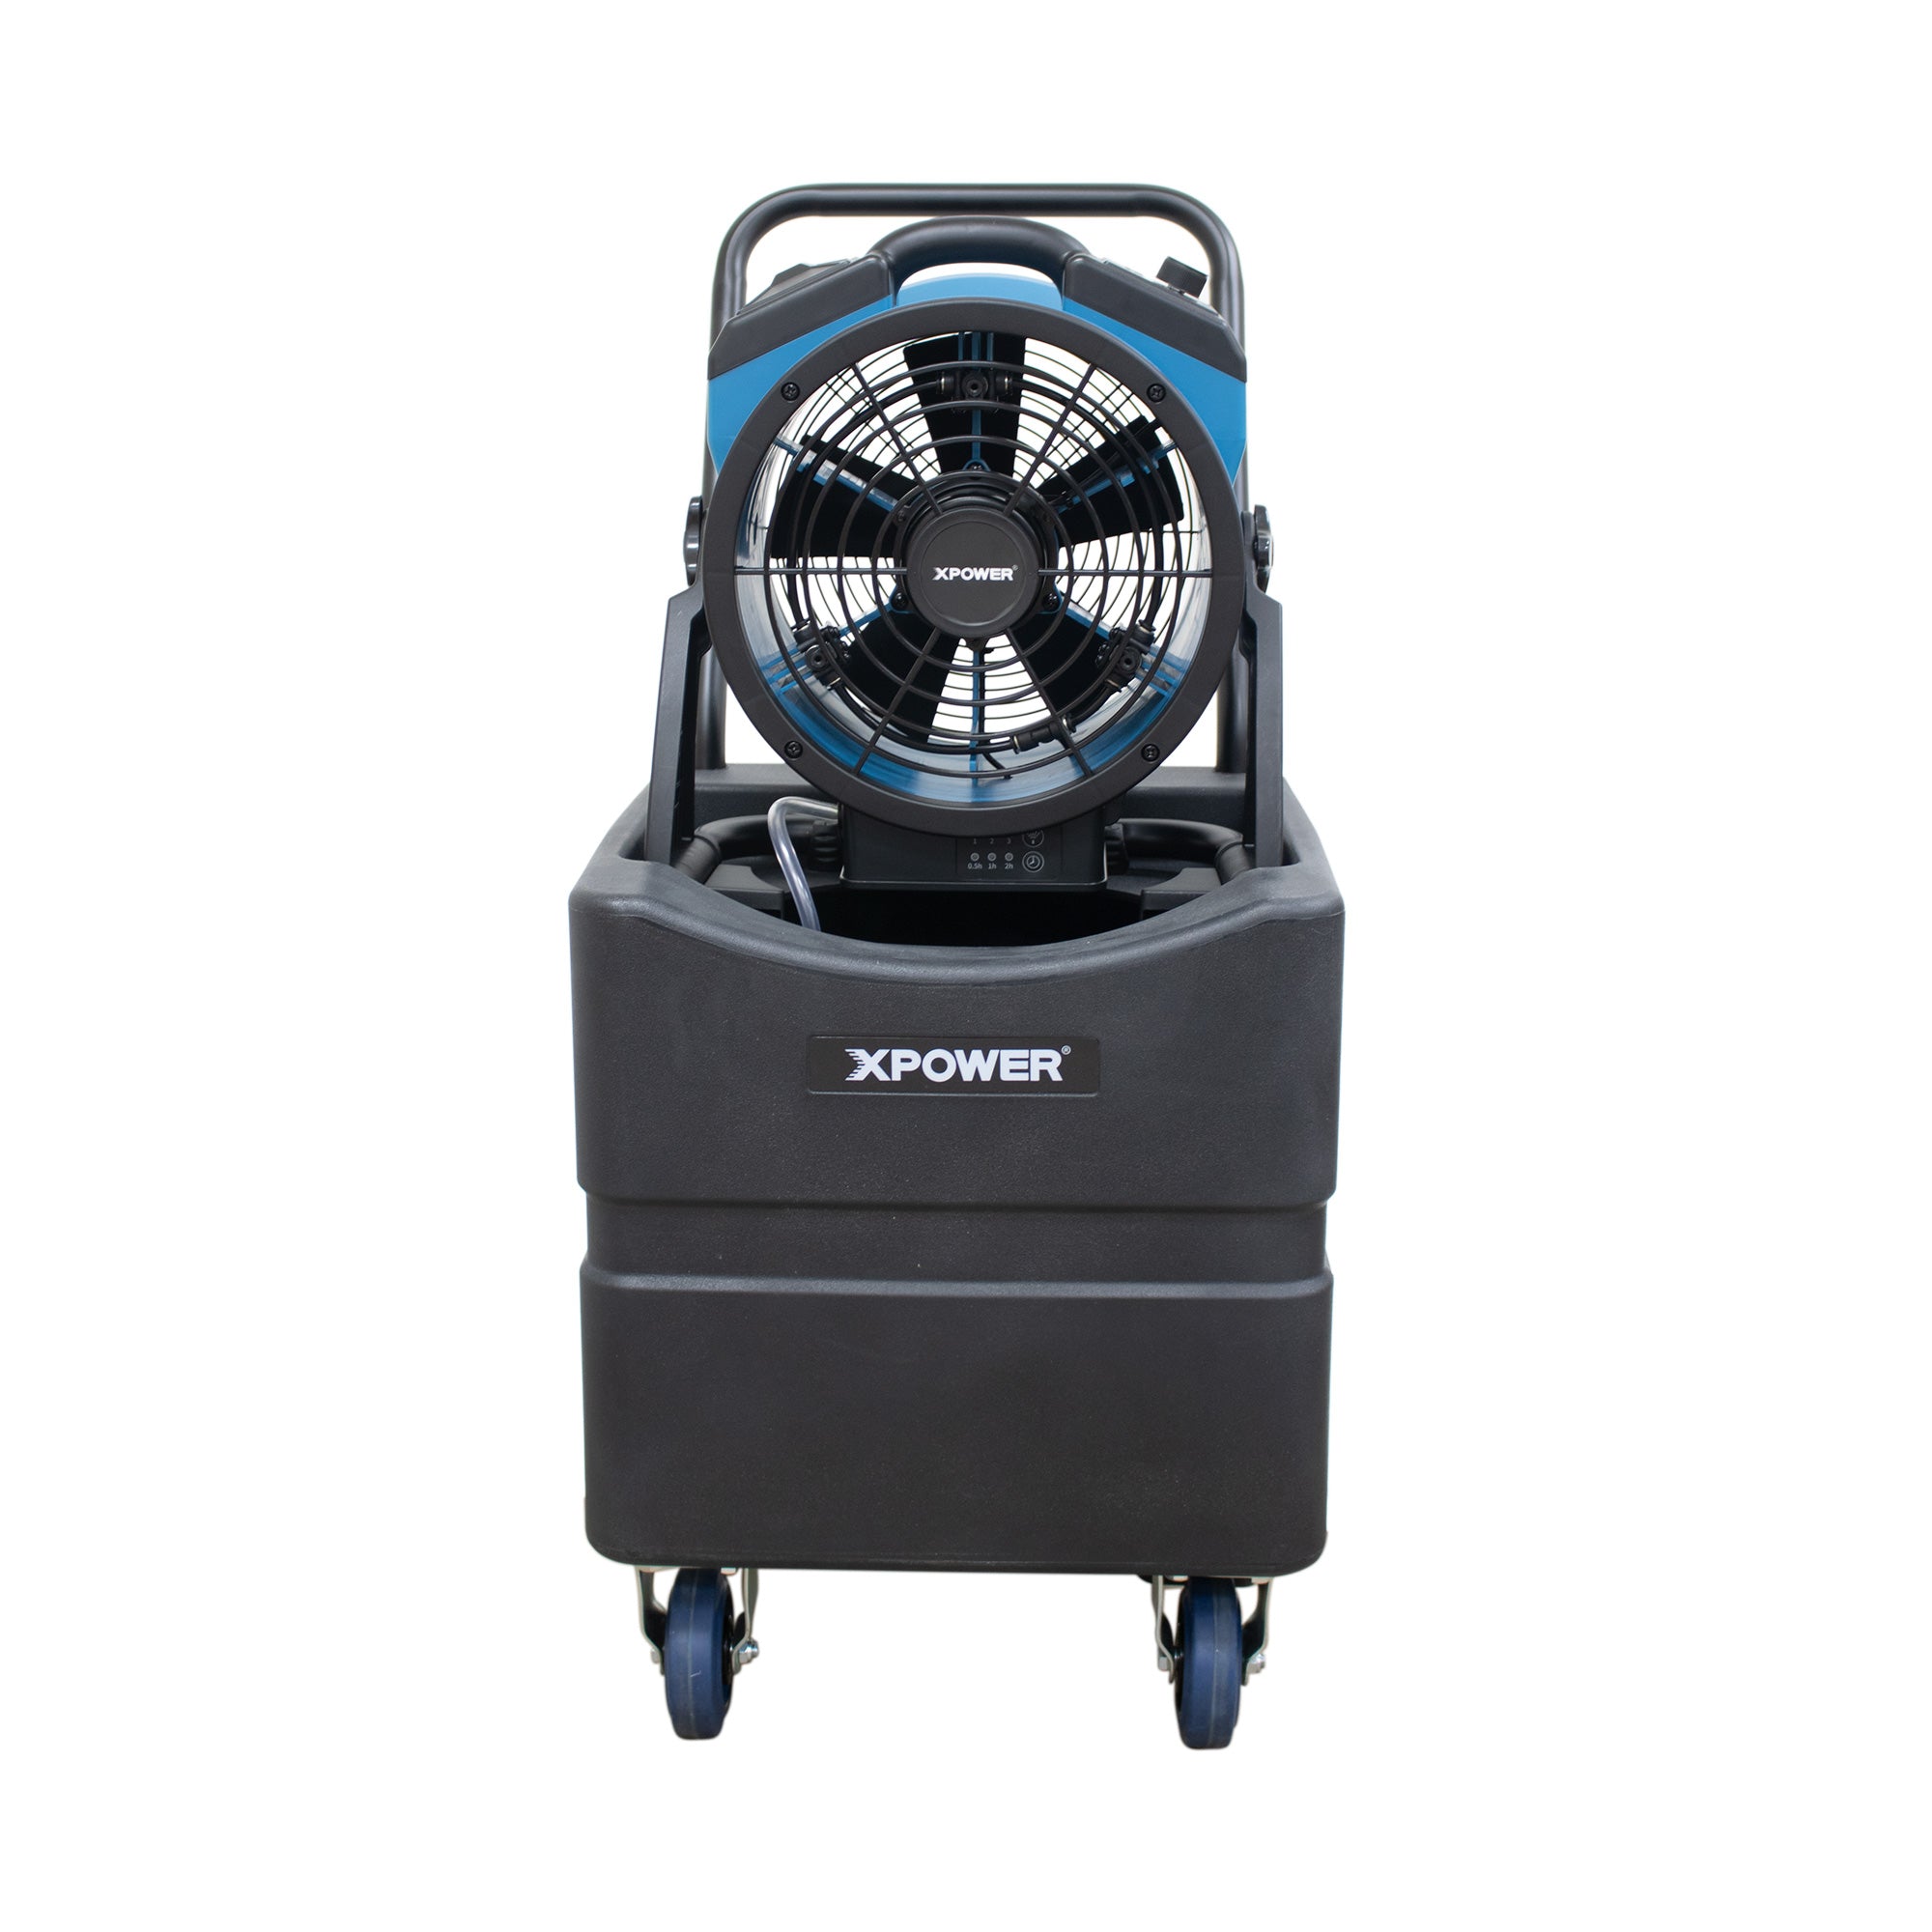 XPOWER FM-65WBK Battery Operated Rechargeable Variable Speed Outdoor Cooling Misting Fan with Built-In Water Pump, Hose, and WT-35 Mobile Water Reservoir Tank